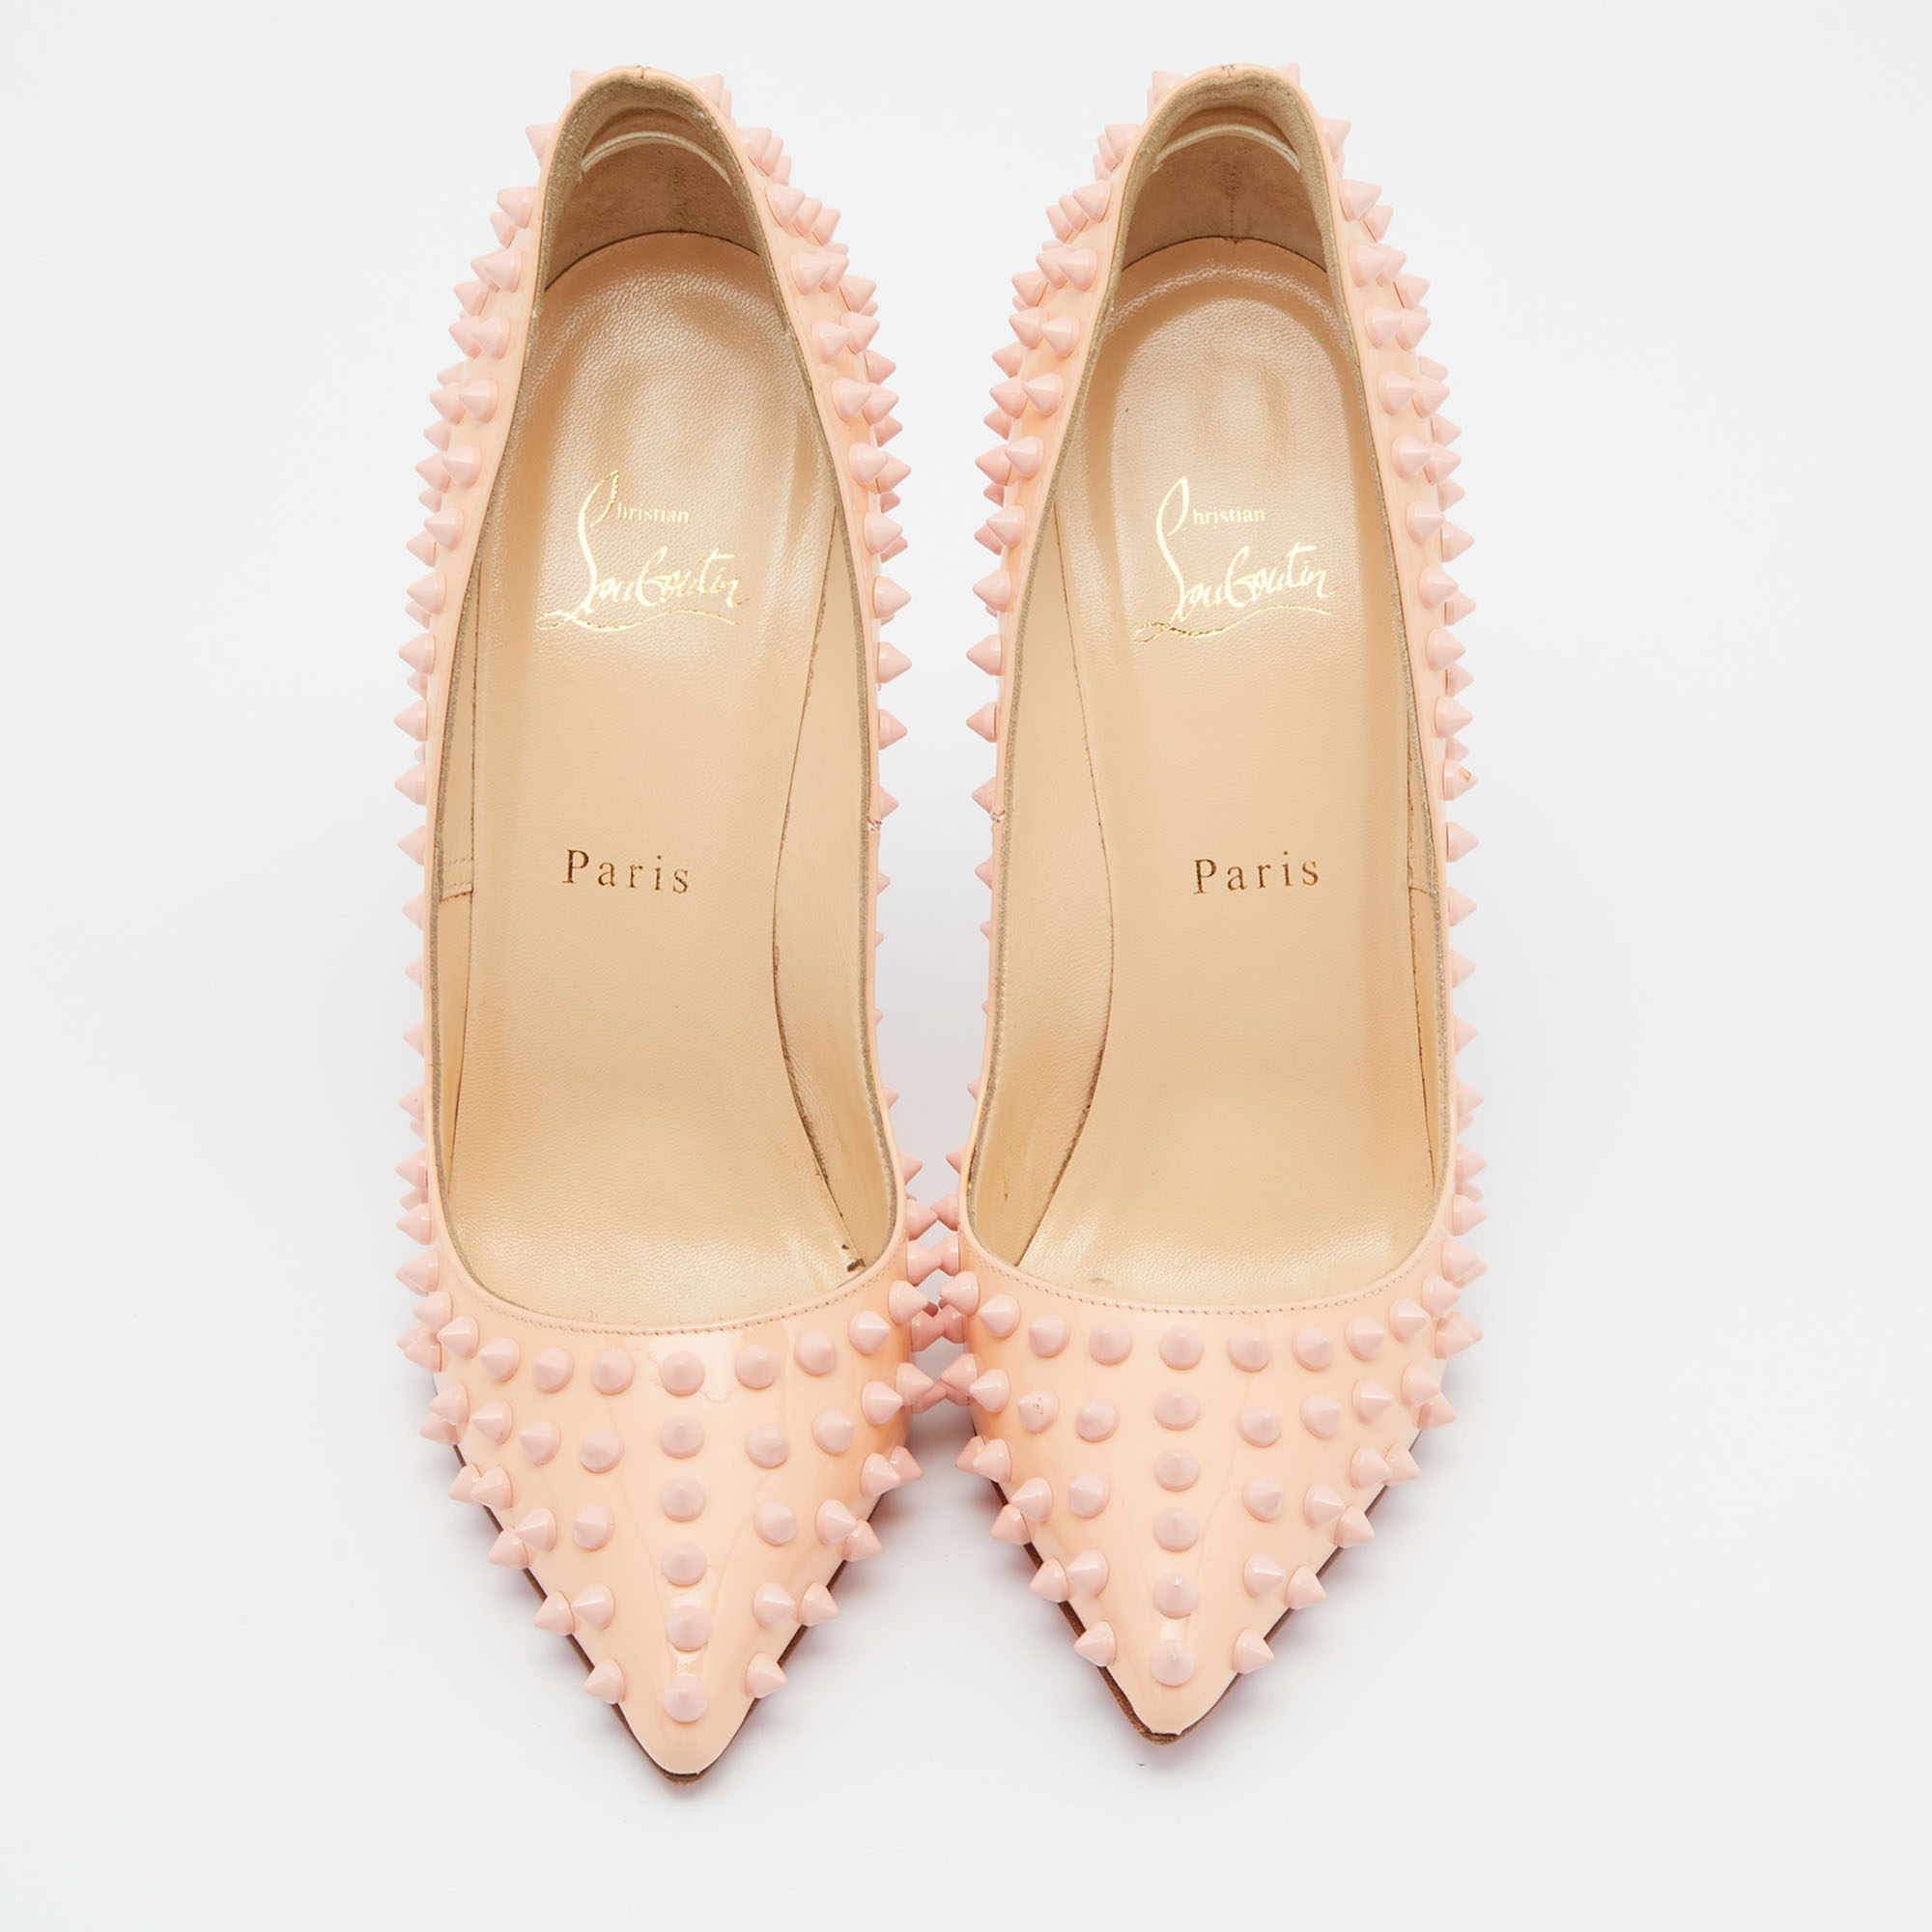 Christian Louboutin Peach Patent Leather Pigalle Spikes Pointed Toe Pumps Size 38